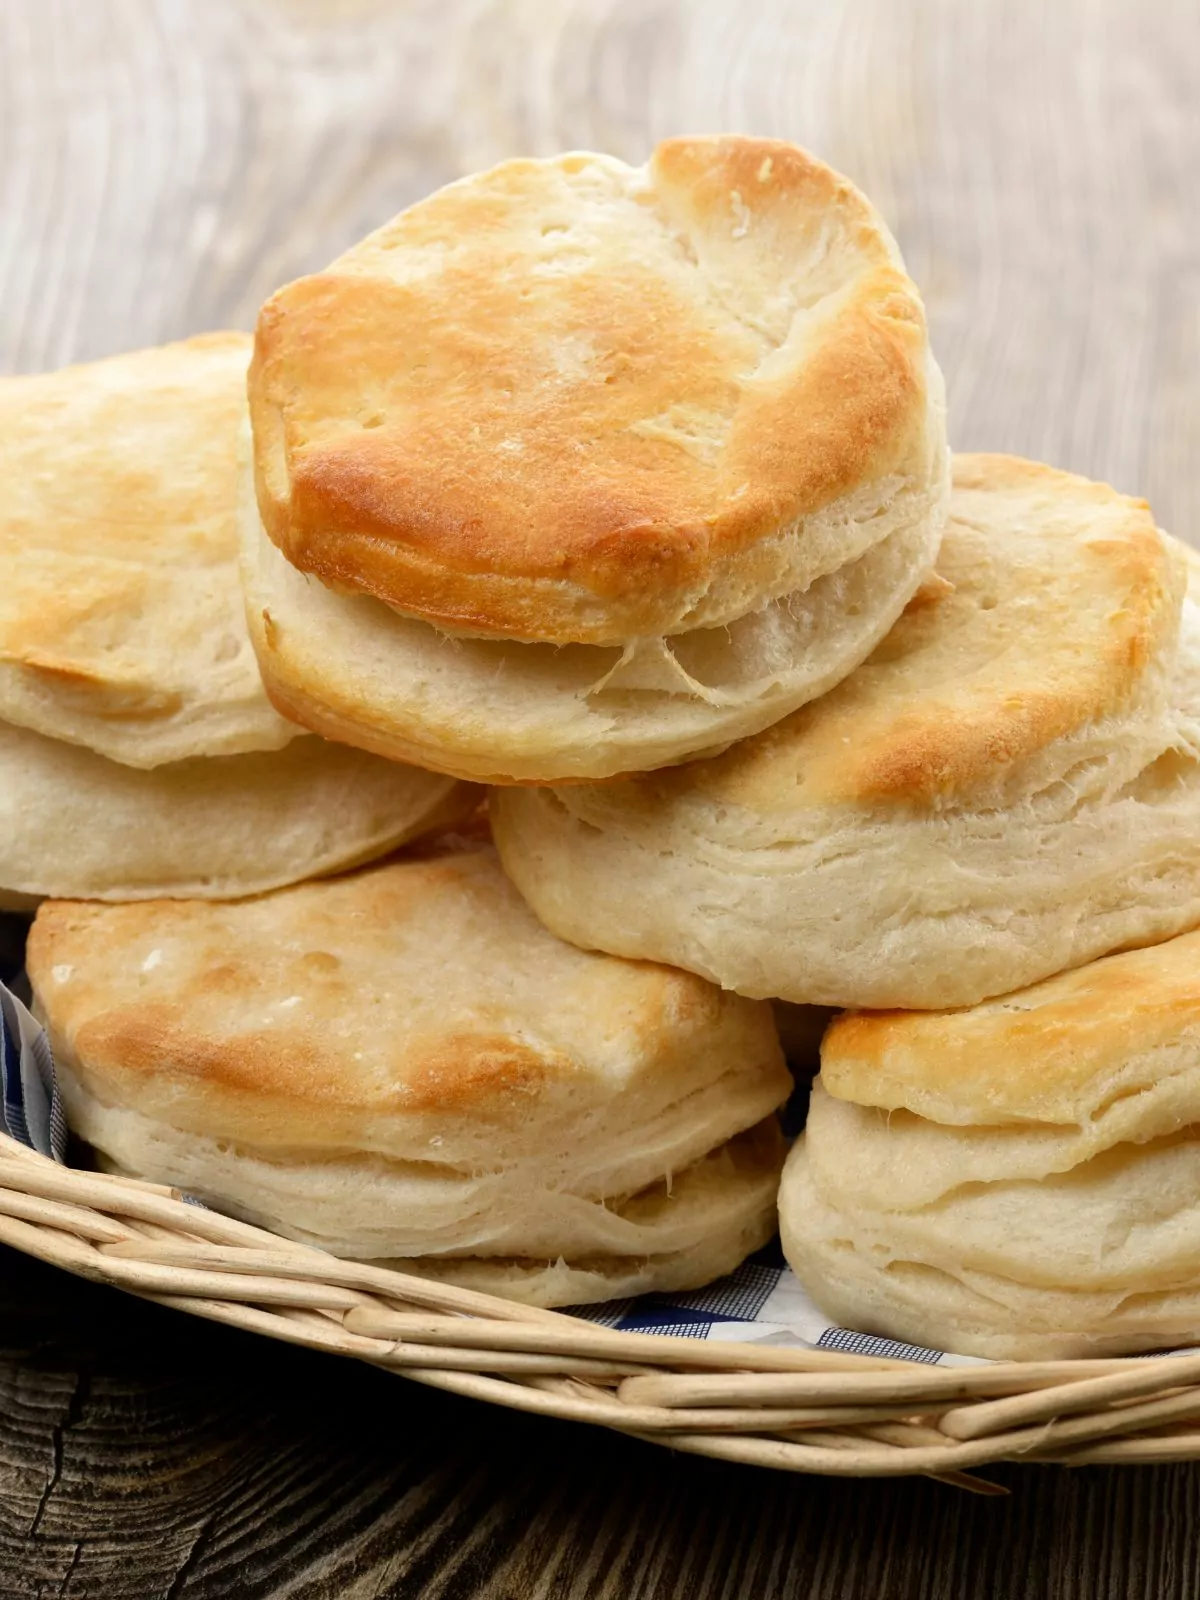 Baked biscuits on plate.